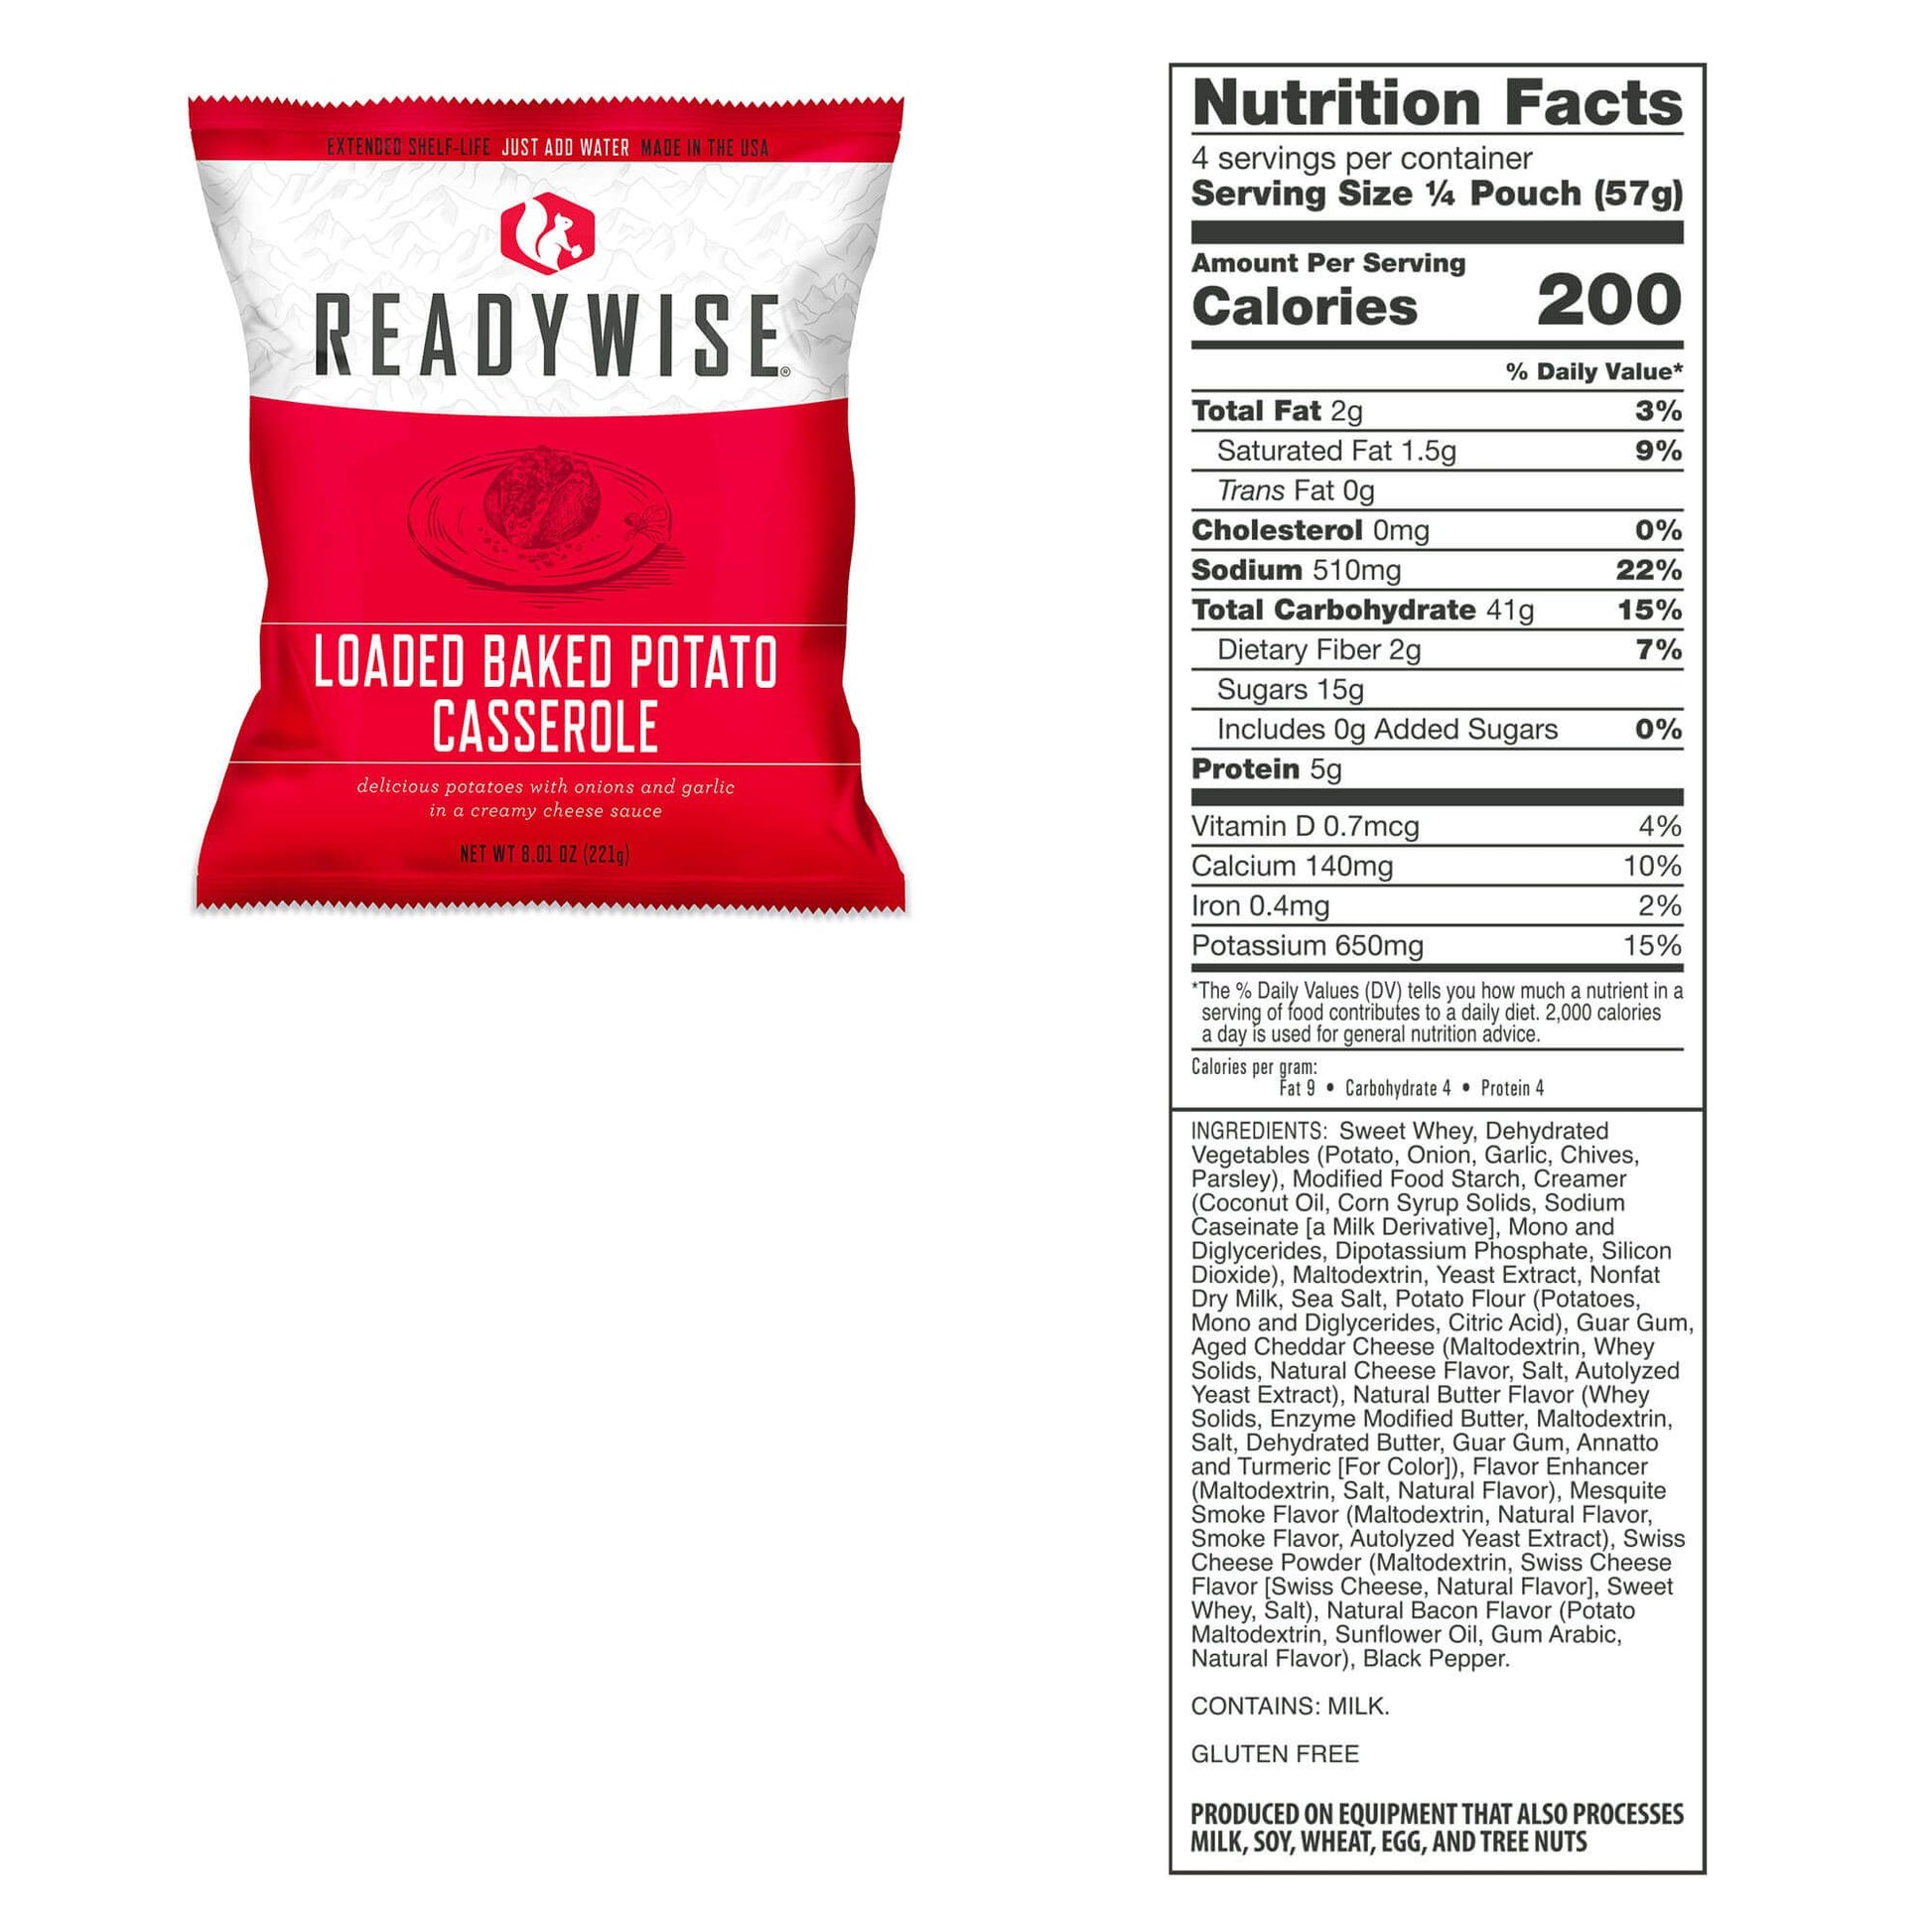 Loaded Baked Potato Casserole packet with nutritional information